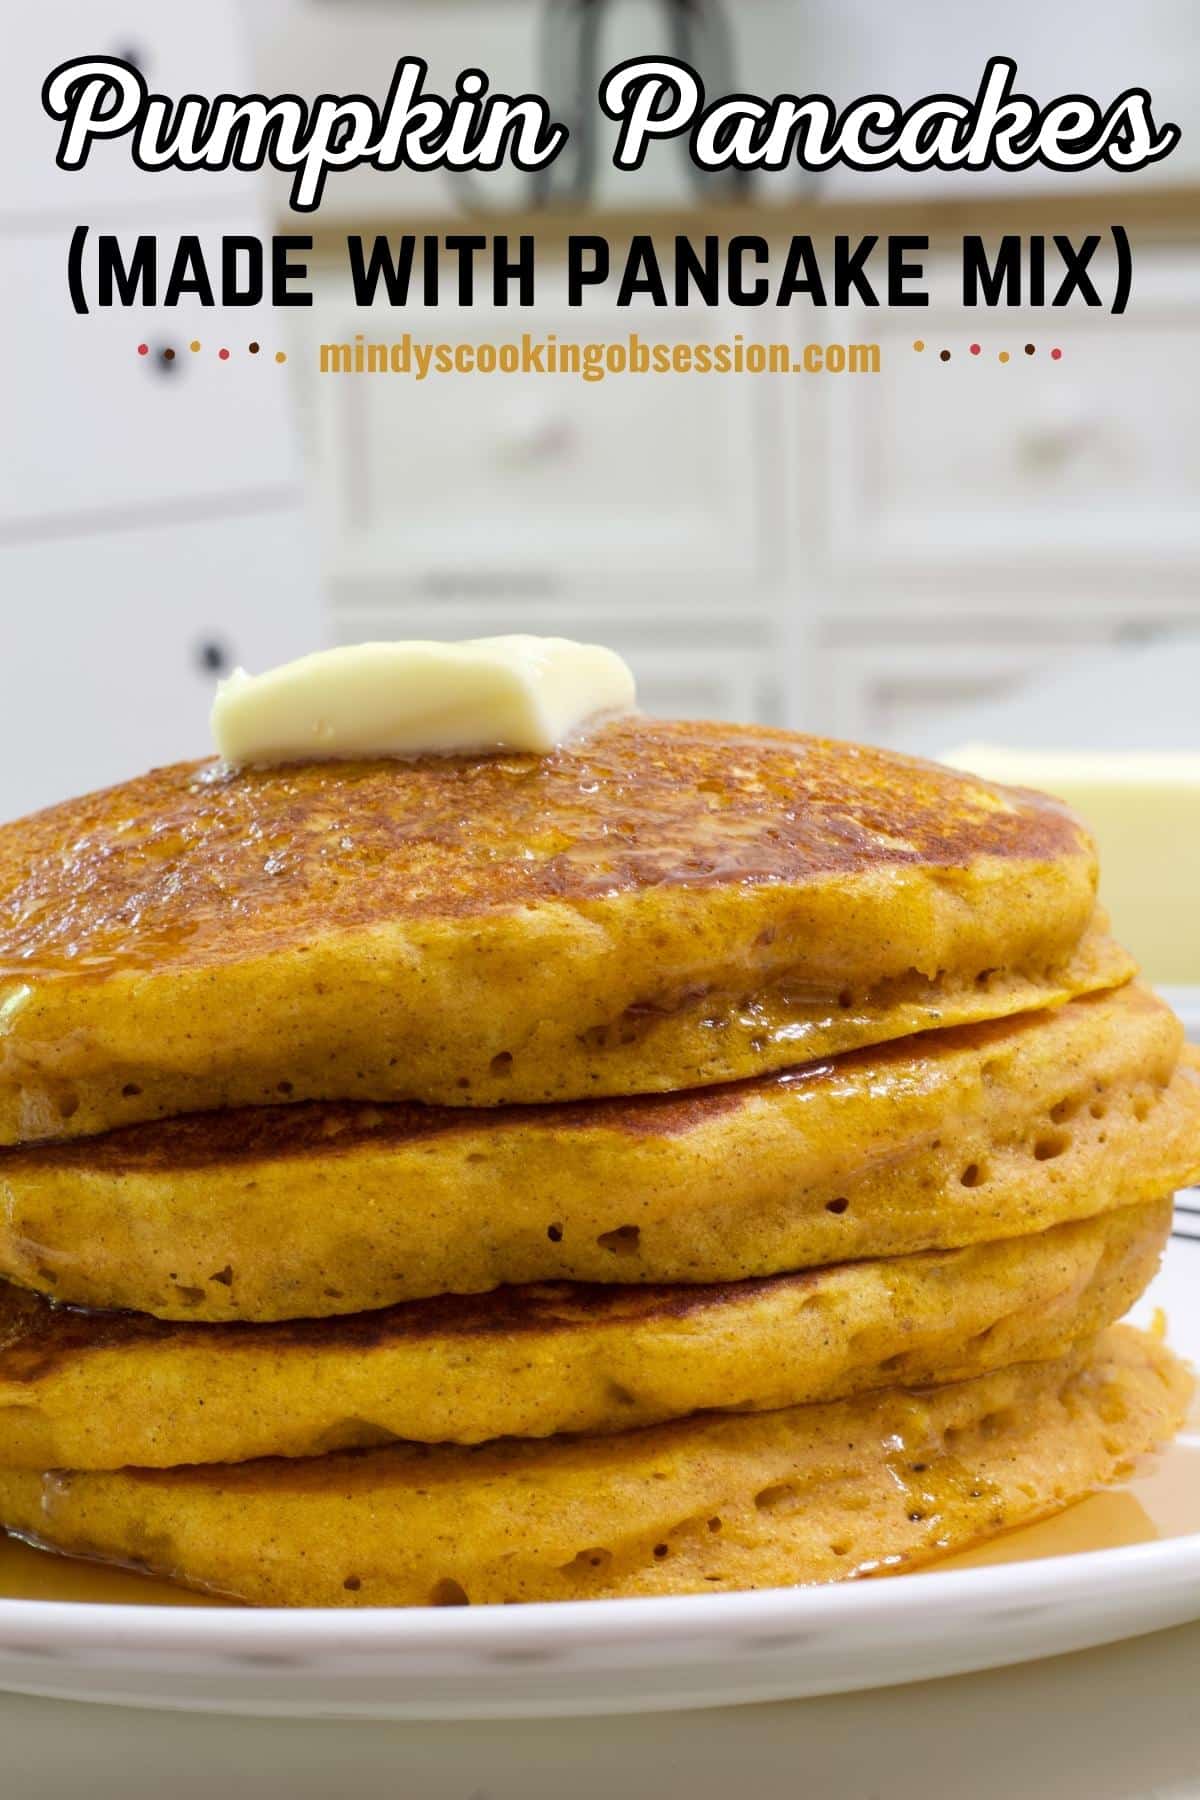 Easy Pumpkin Pancakes Recipe (with Pancake Mix) uses just 5 ingredients to make light & fluffy pancakes for a delicious fall breakfast. via @mindyscookingobsession